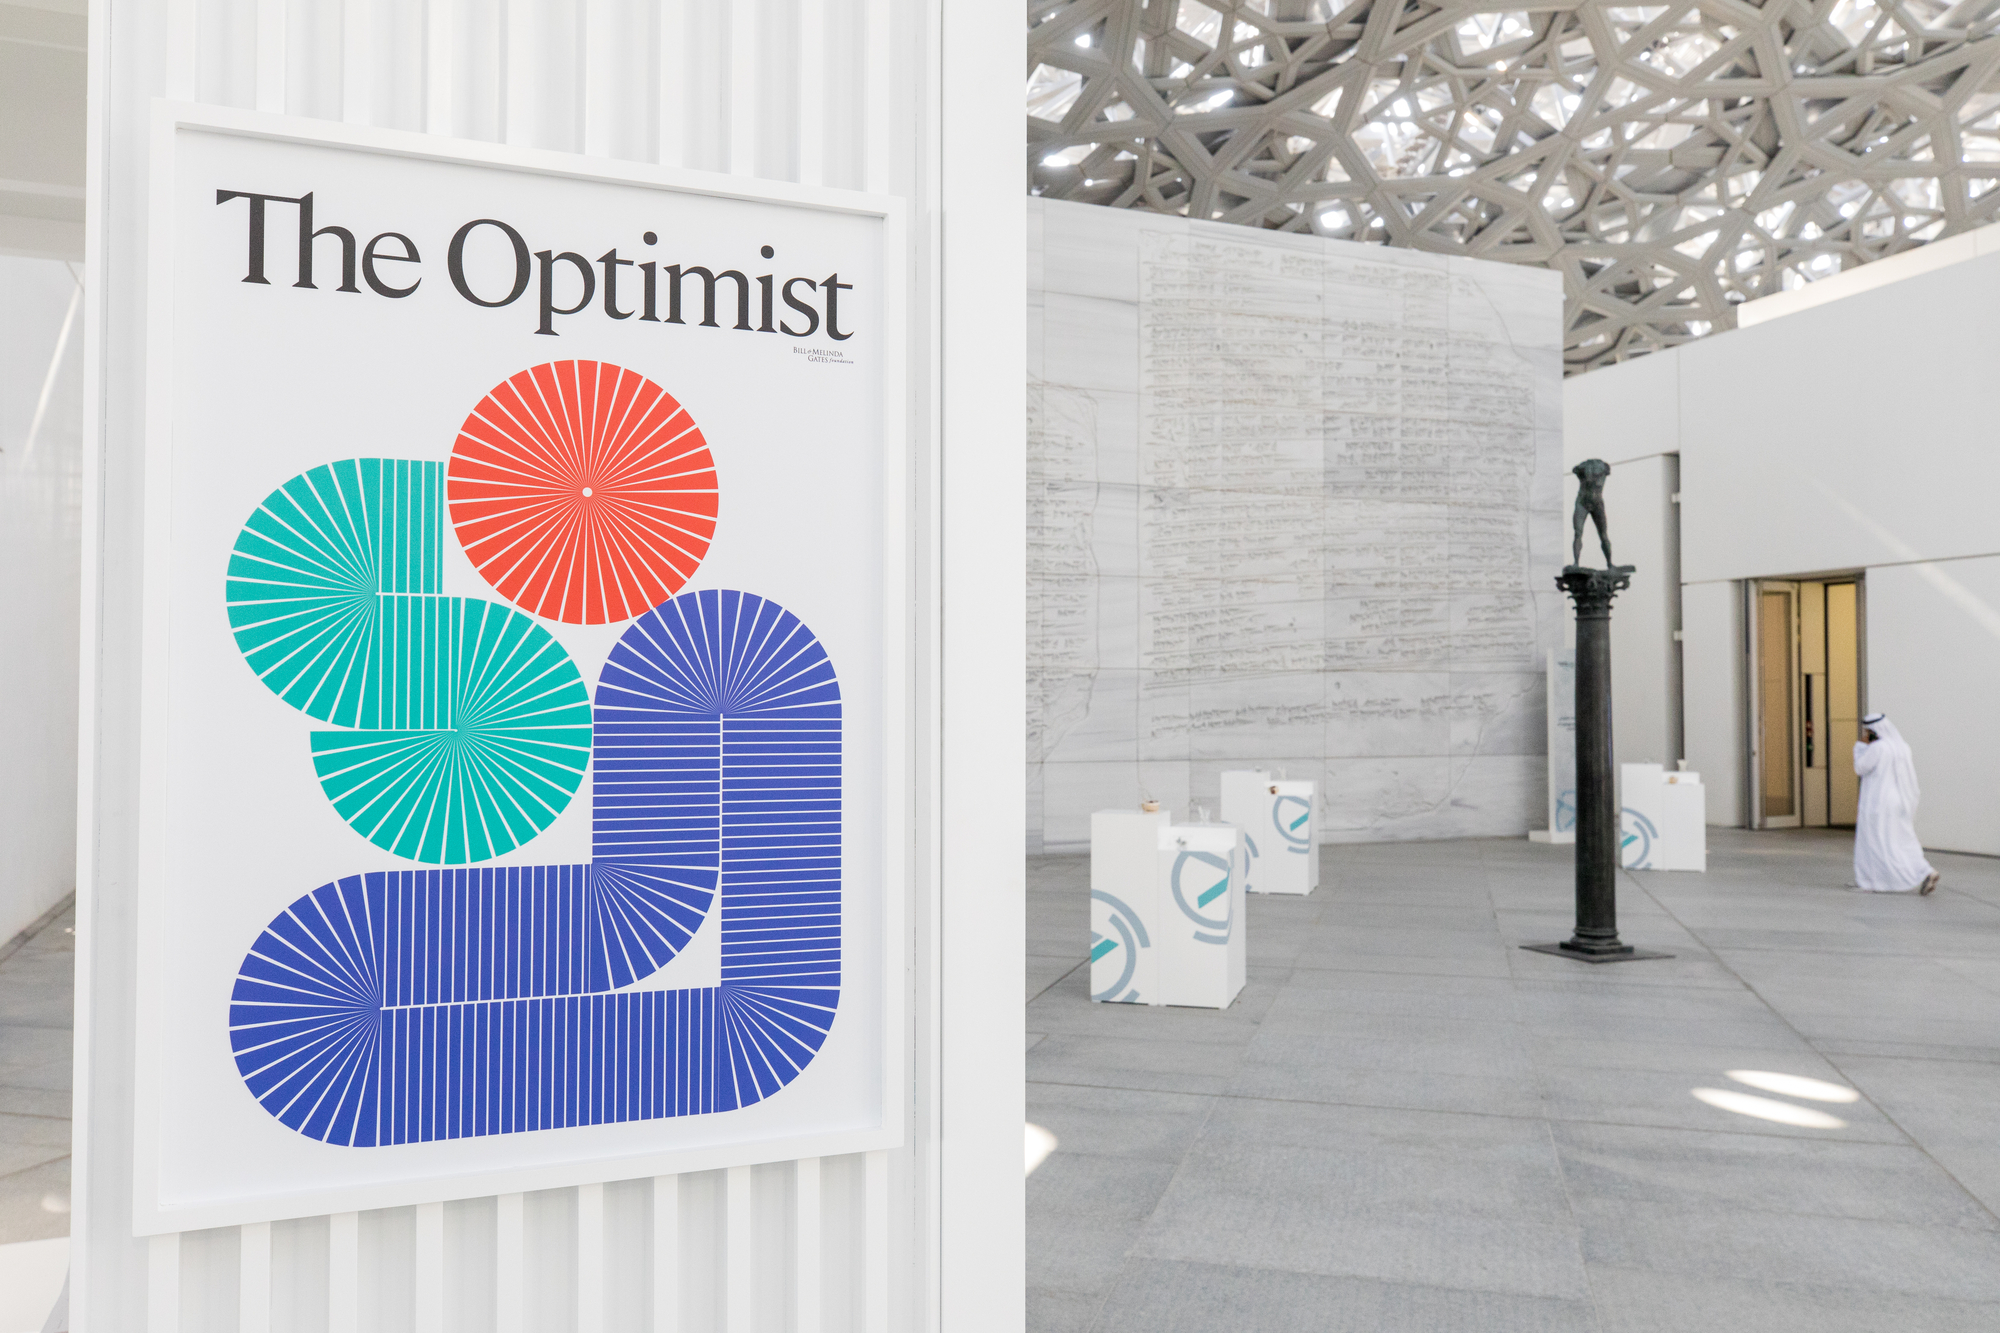 A general view of the ‘The Optimist’ display during the Reaching the Last Mile Forum, held under the patronage of His Highness Sheikh Mohamed bin Zayed Al Nahyan, Crown Prince of Abu Dhabi, and in partnership with the Bill & Melinda Gates Foundation at the Louvre Abu Dhabi in Abu Dhabi, United Arab Emirates on November 19, 2019. 